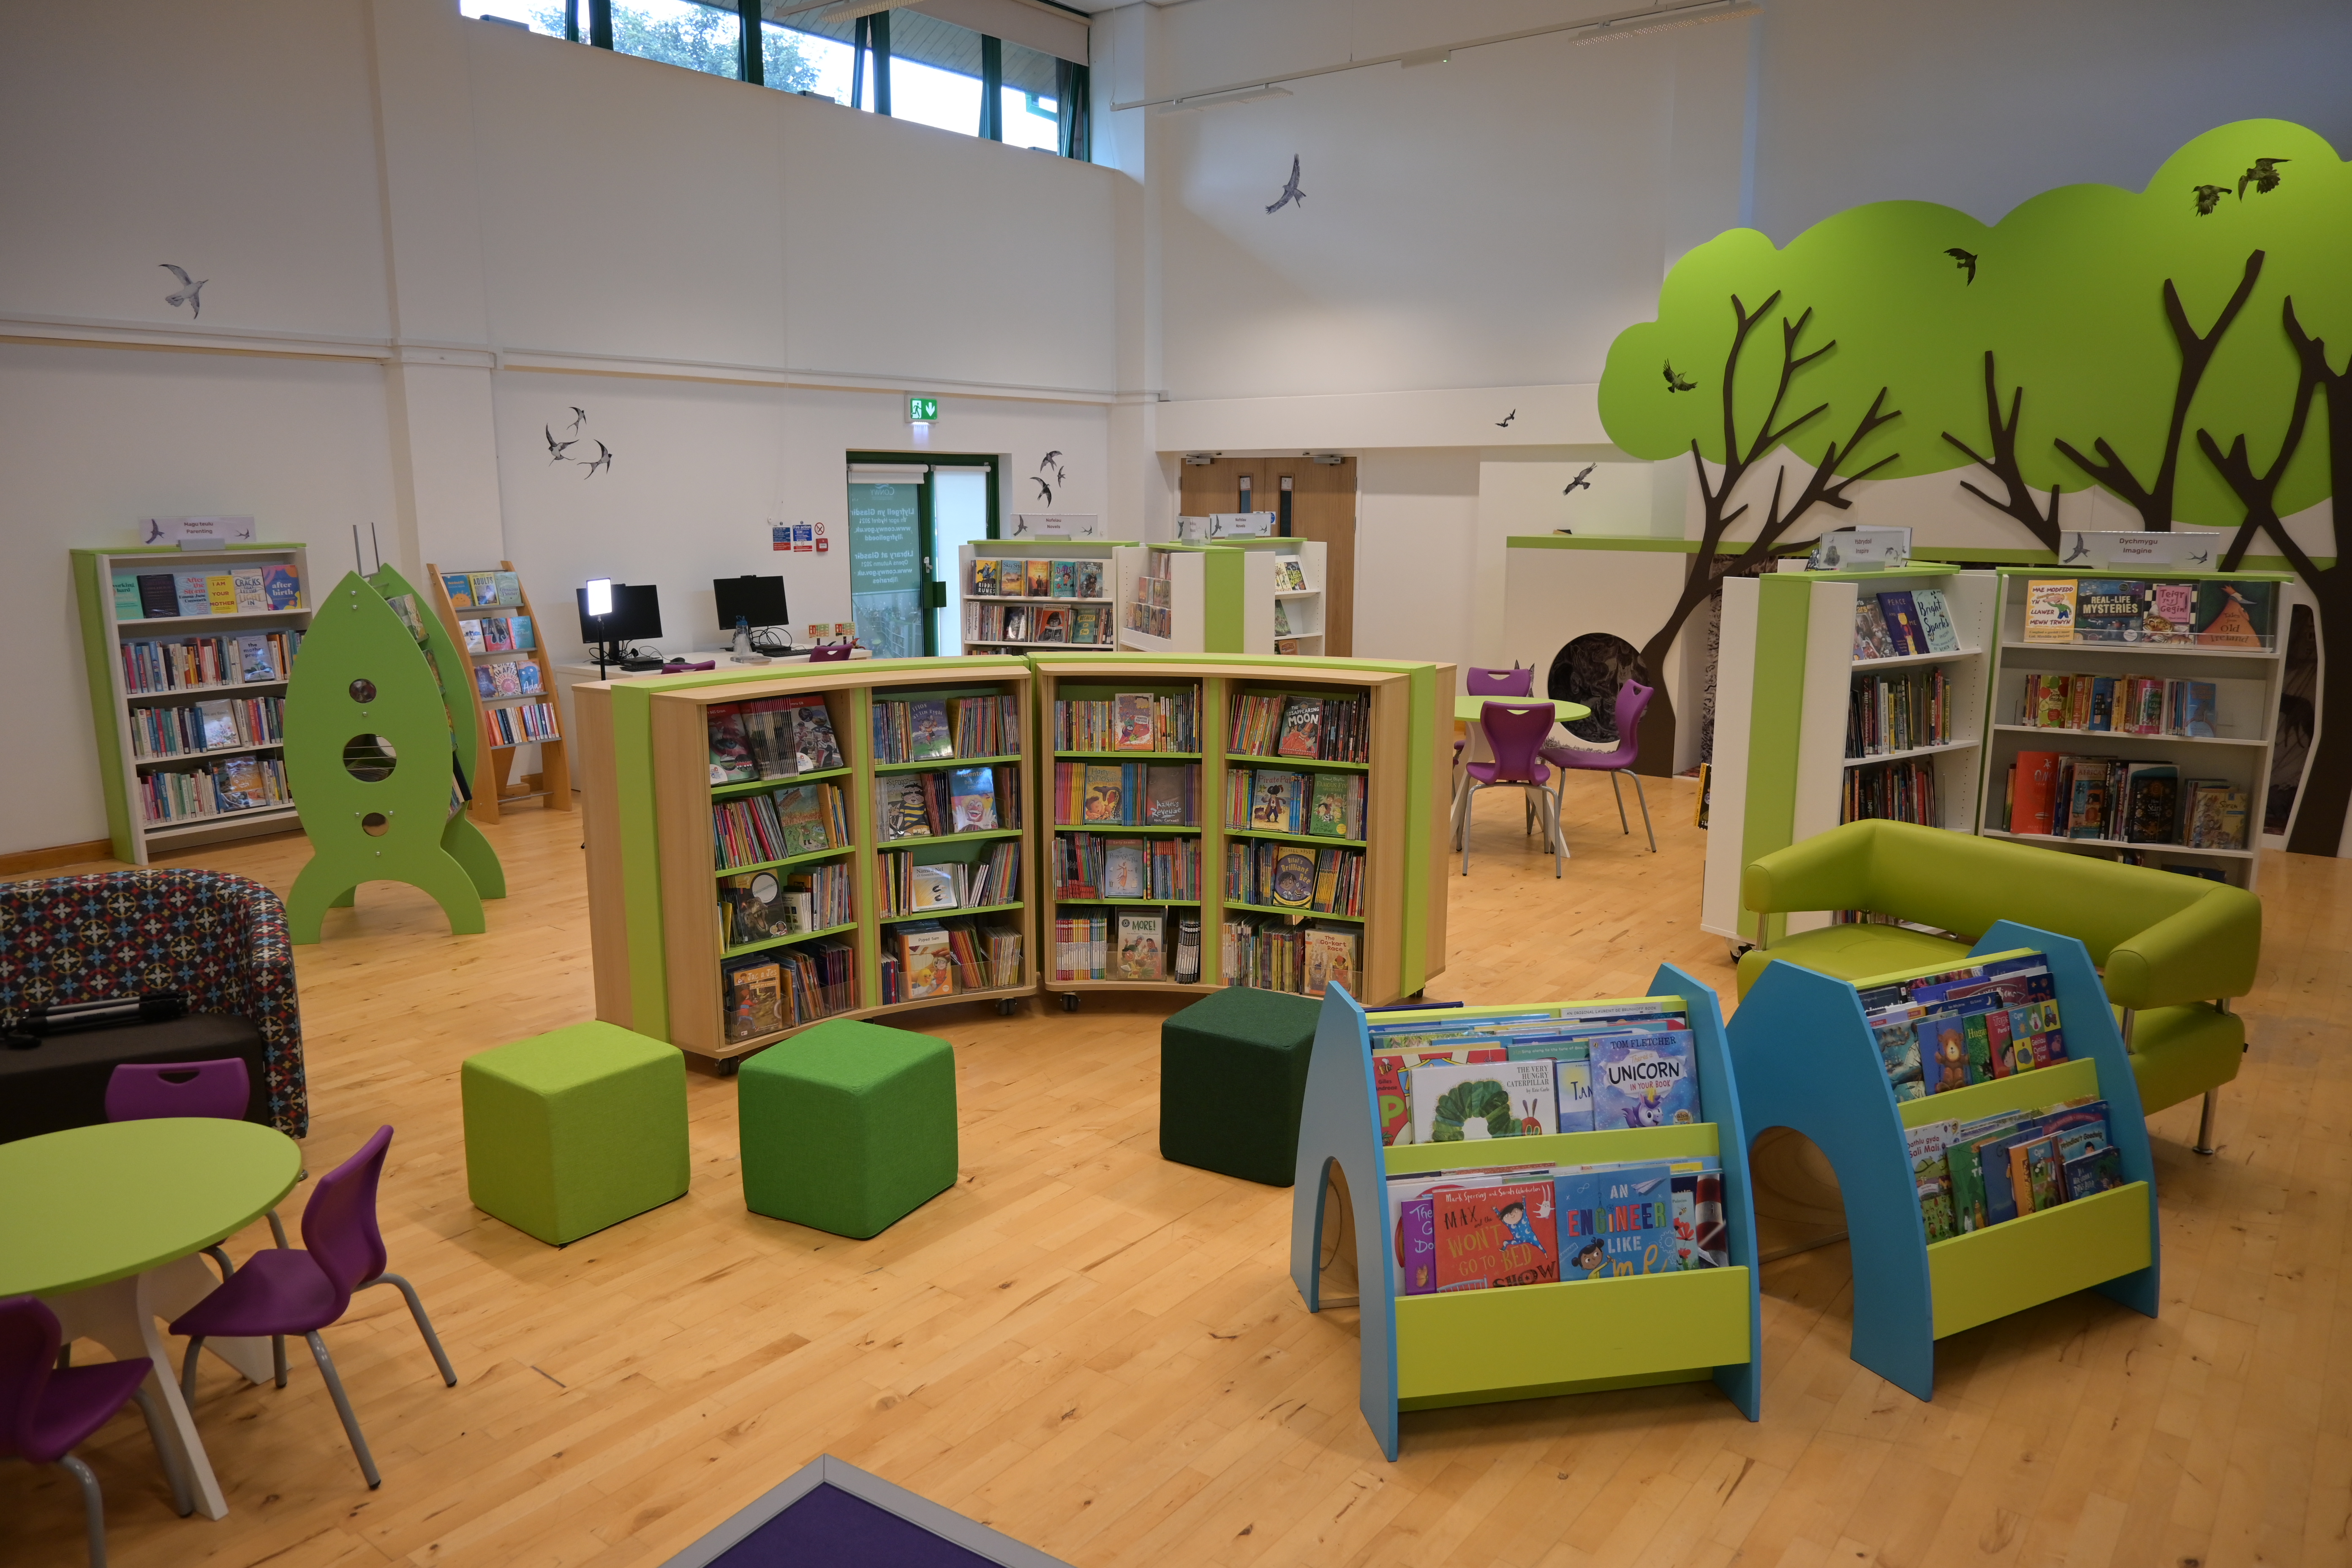 Overview of children’s library